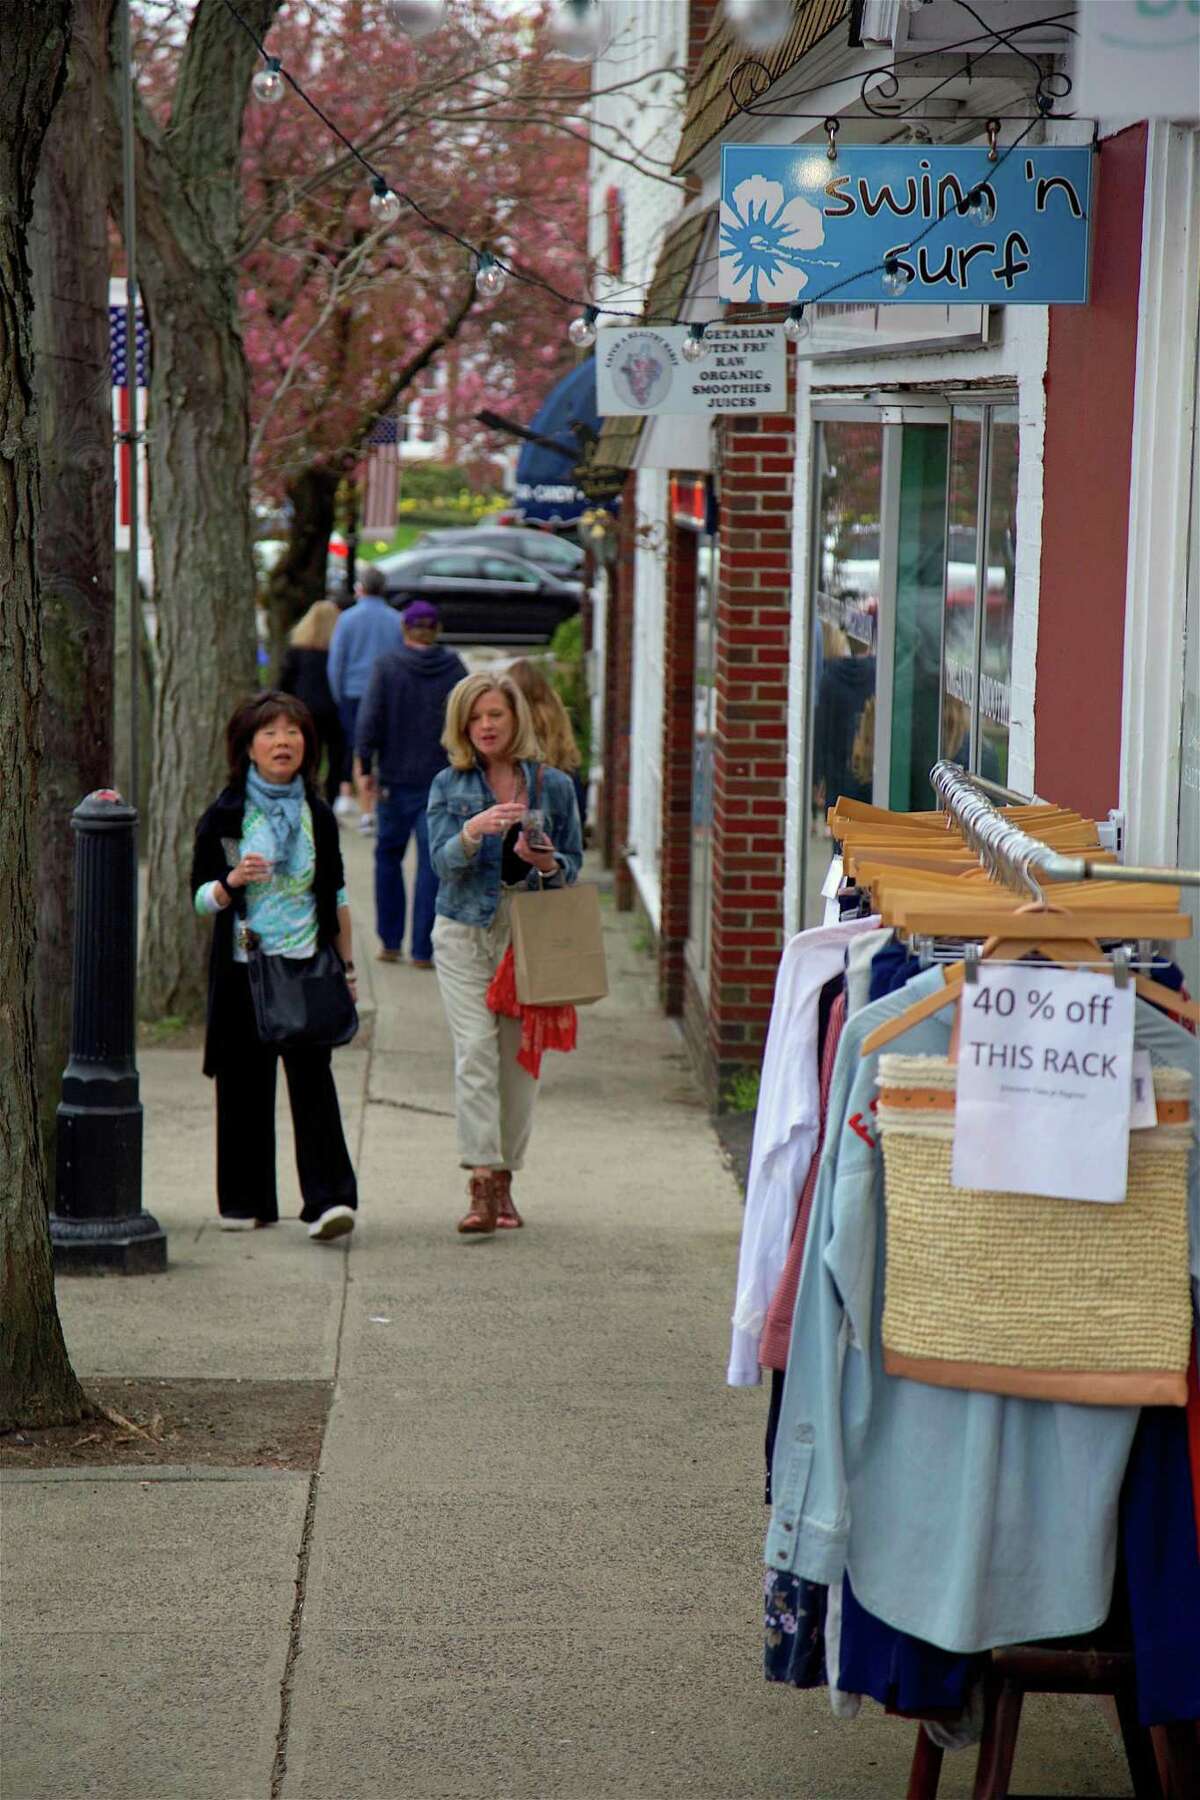 Discounts were in the offing, as in this shop along Unquowa Road, at the downtown Fairfield Shop & Stroll on Thursday, April 25, 2019, in Fairfield, Conn.